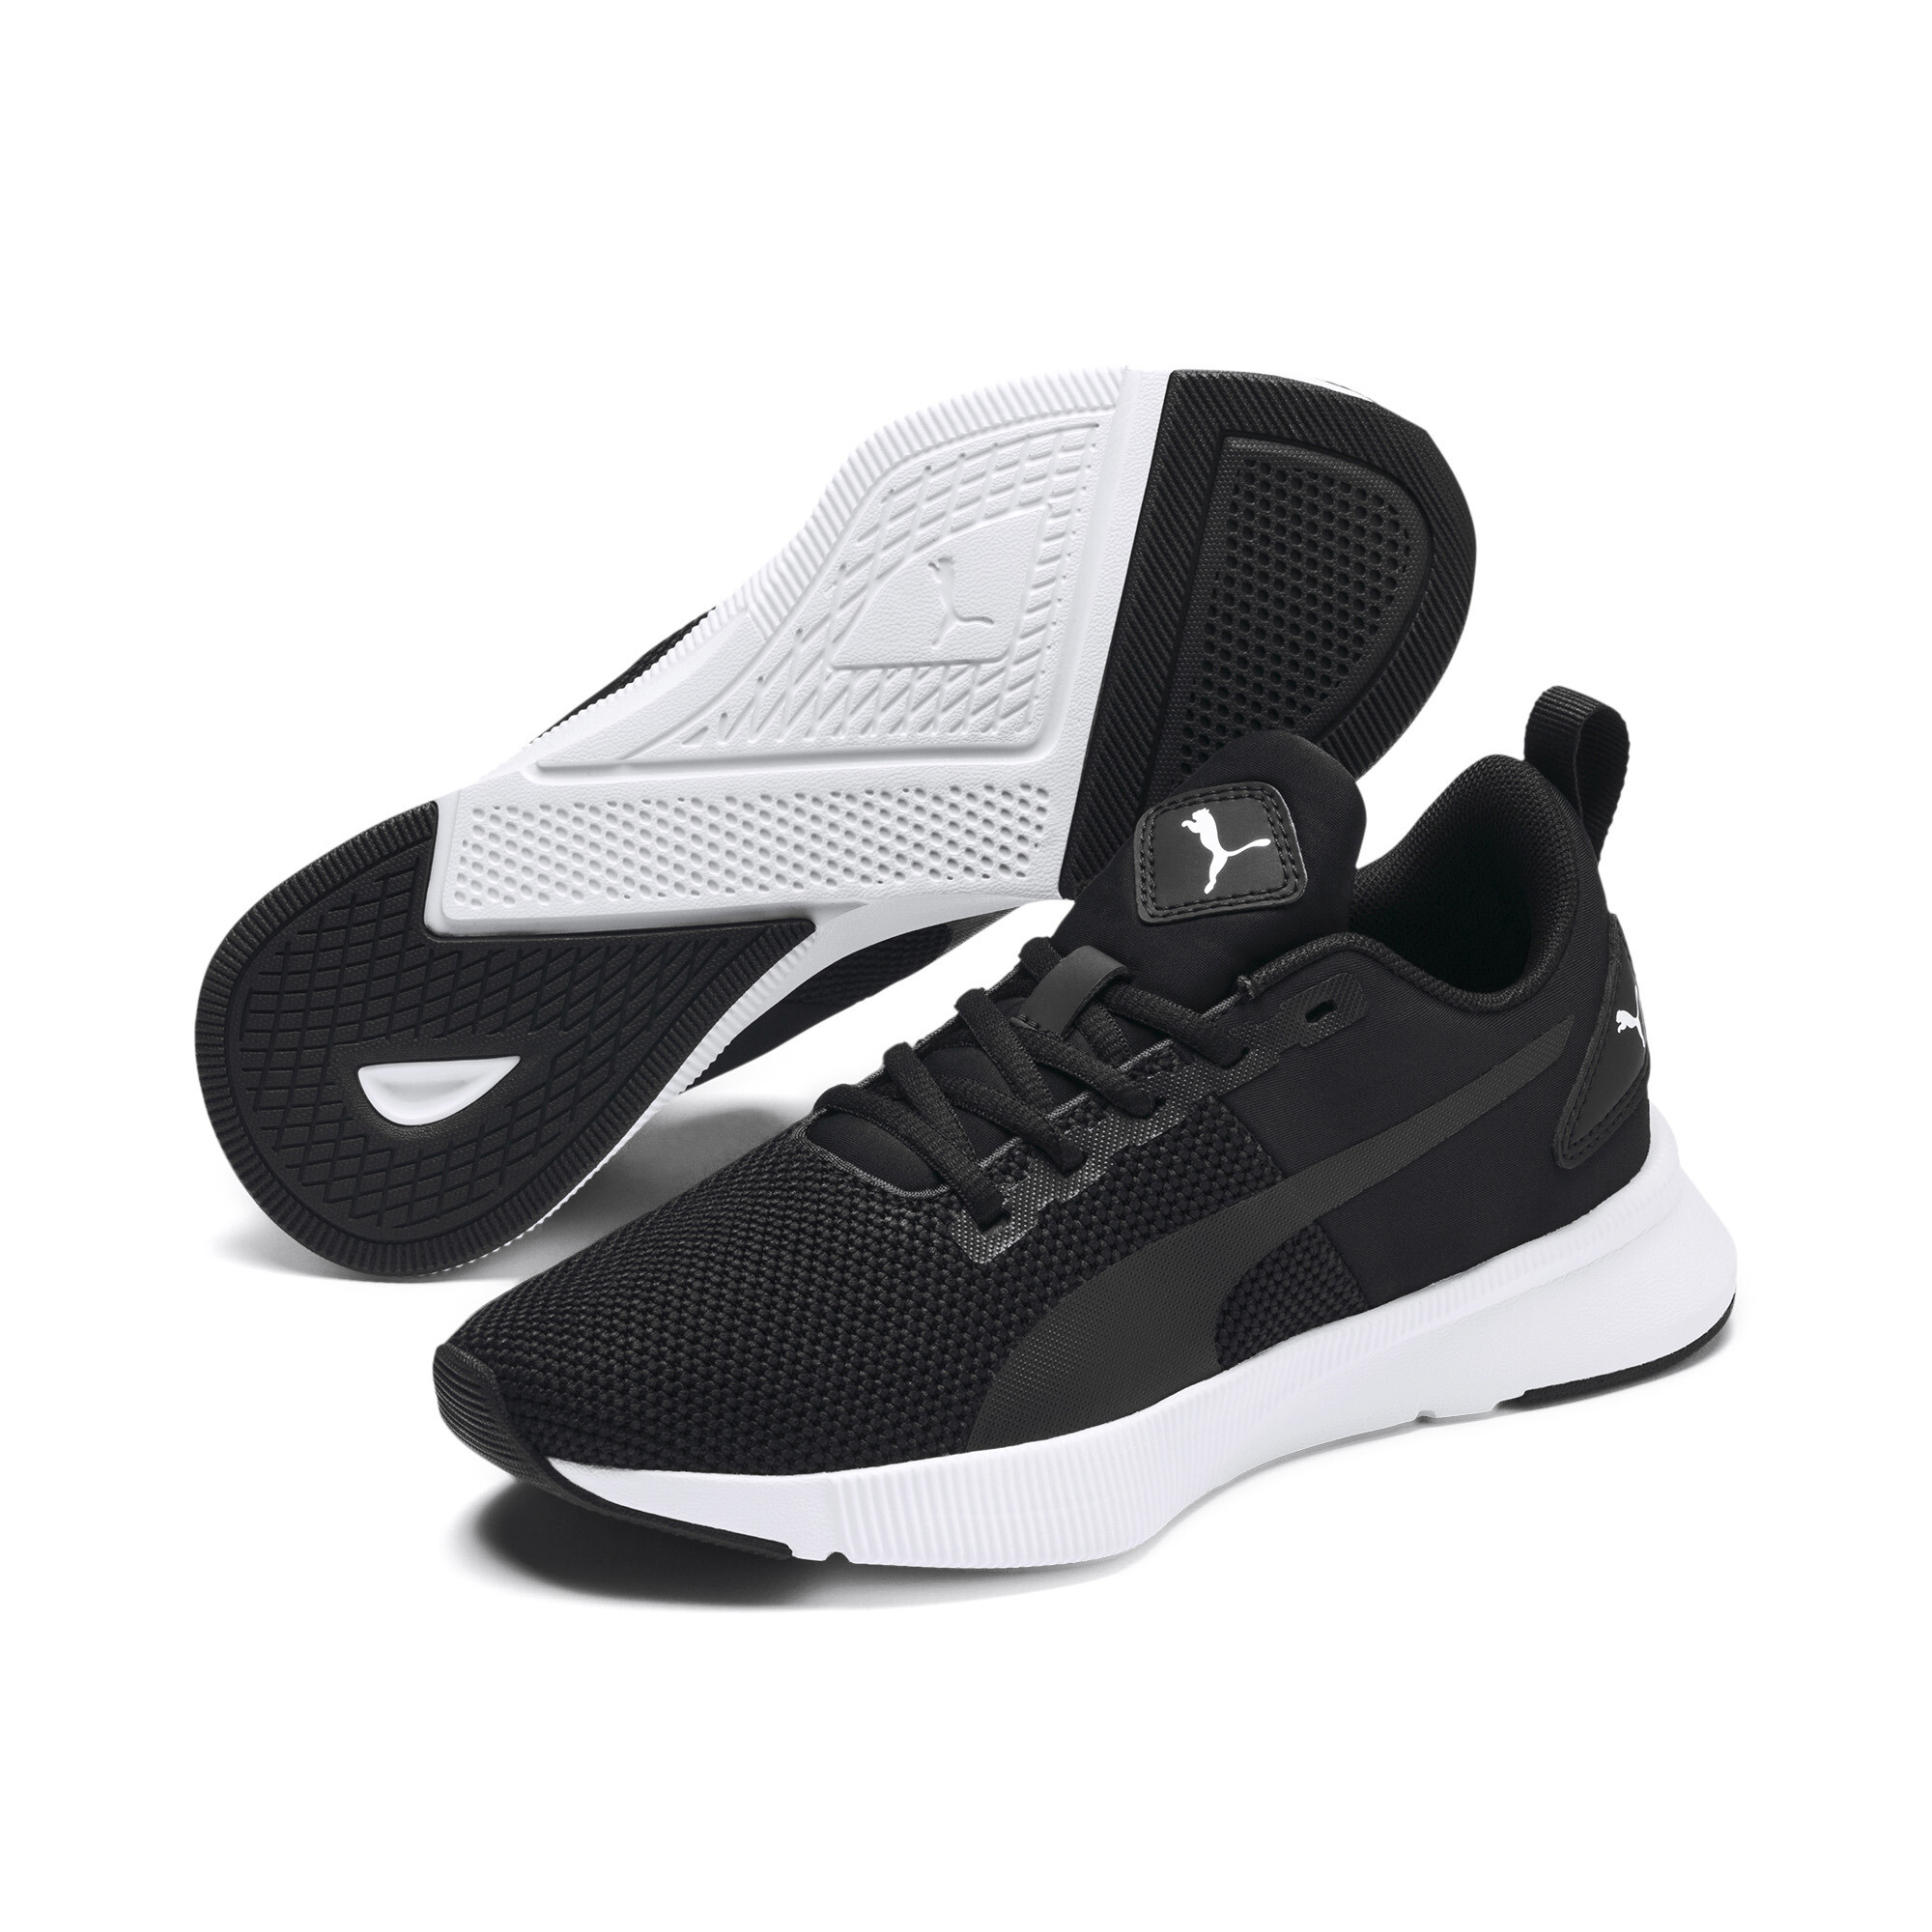 PUMA Flyer Runner Youth Trainers In 10 - Black, Size EU 38